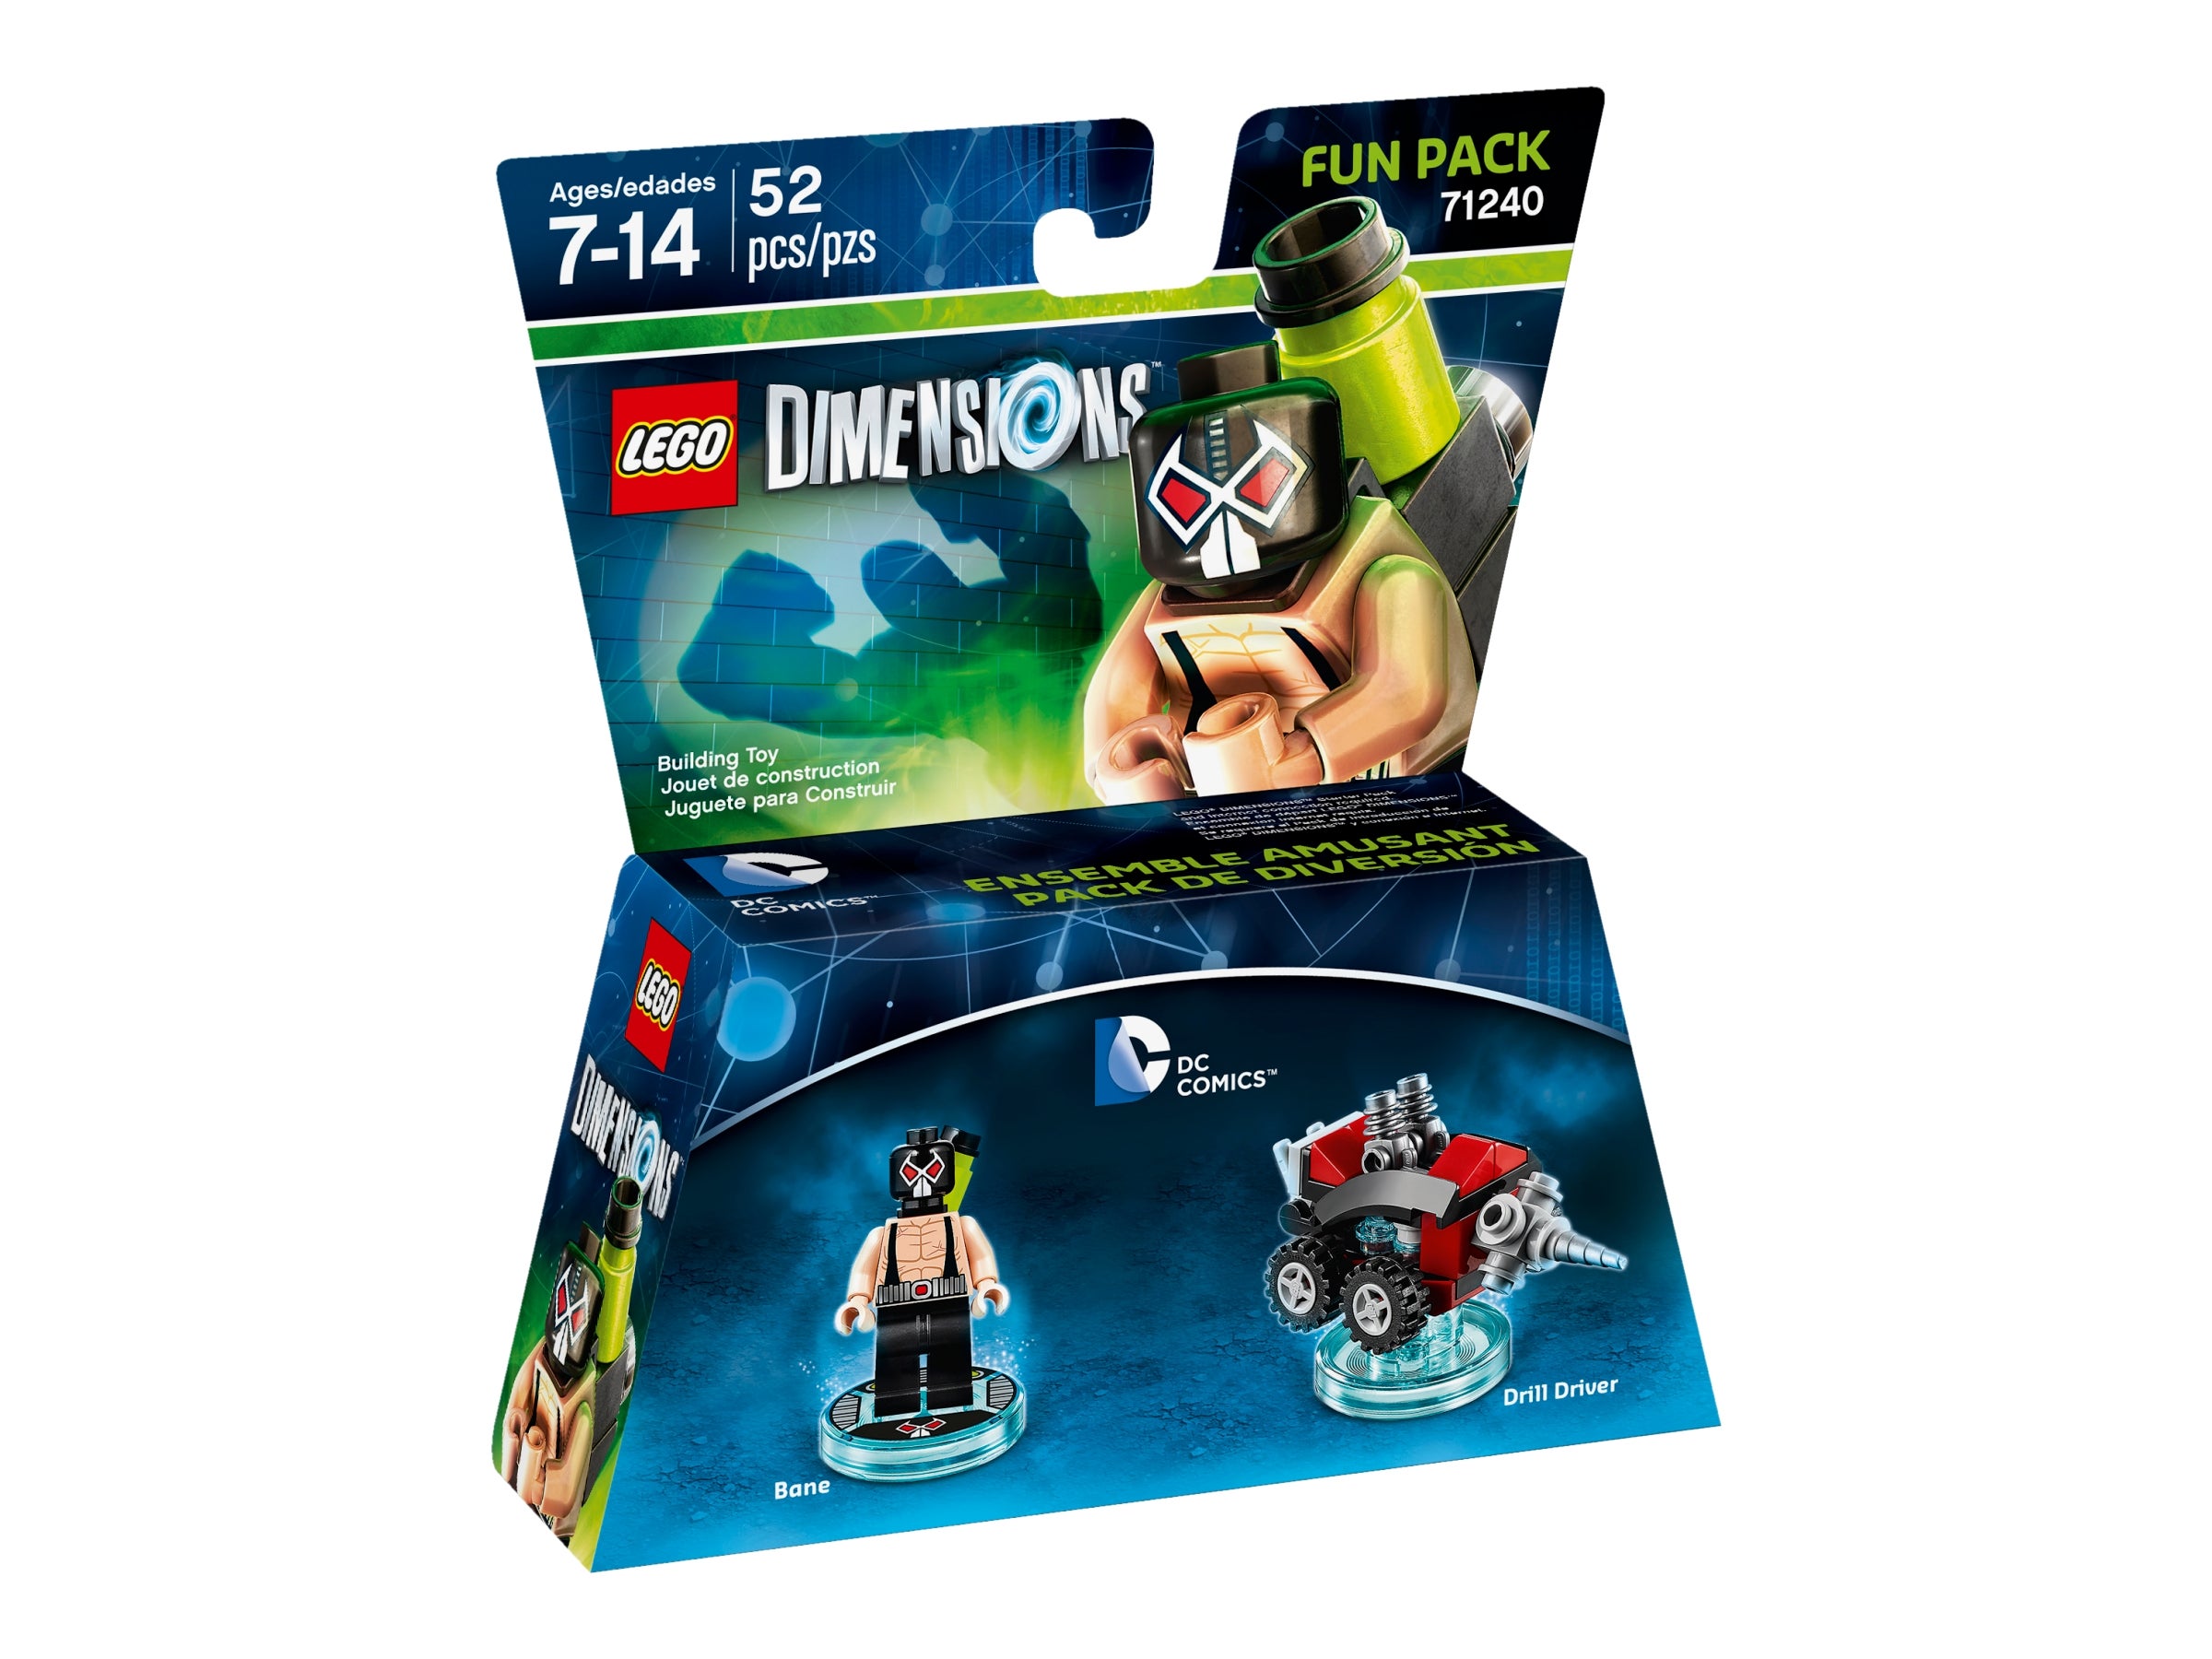 Details about   LEGO Dimensions 71240 DC Comics Fun Pack Game Disc base stand BANE minifigure